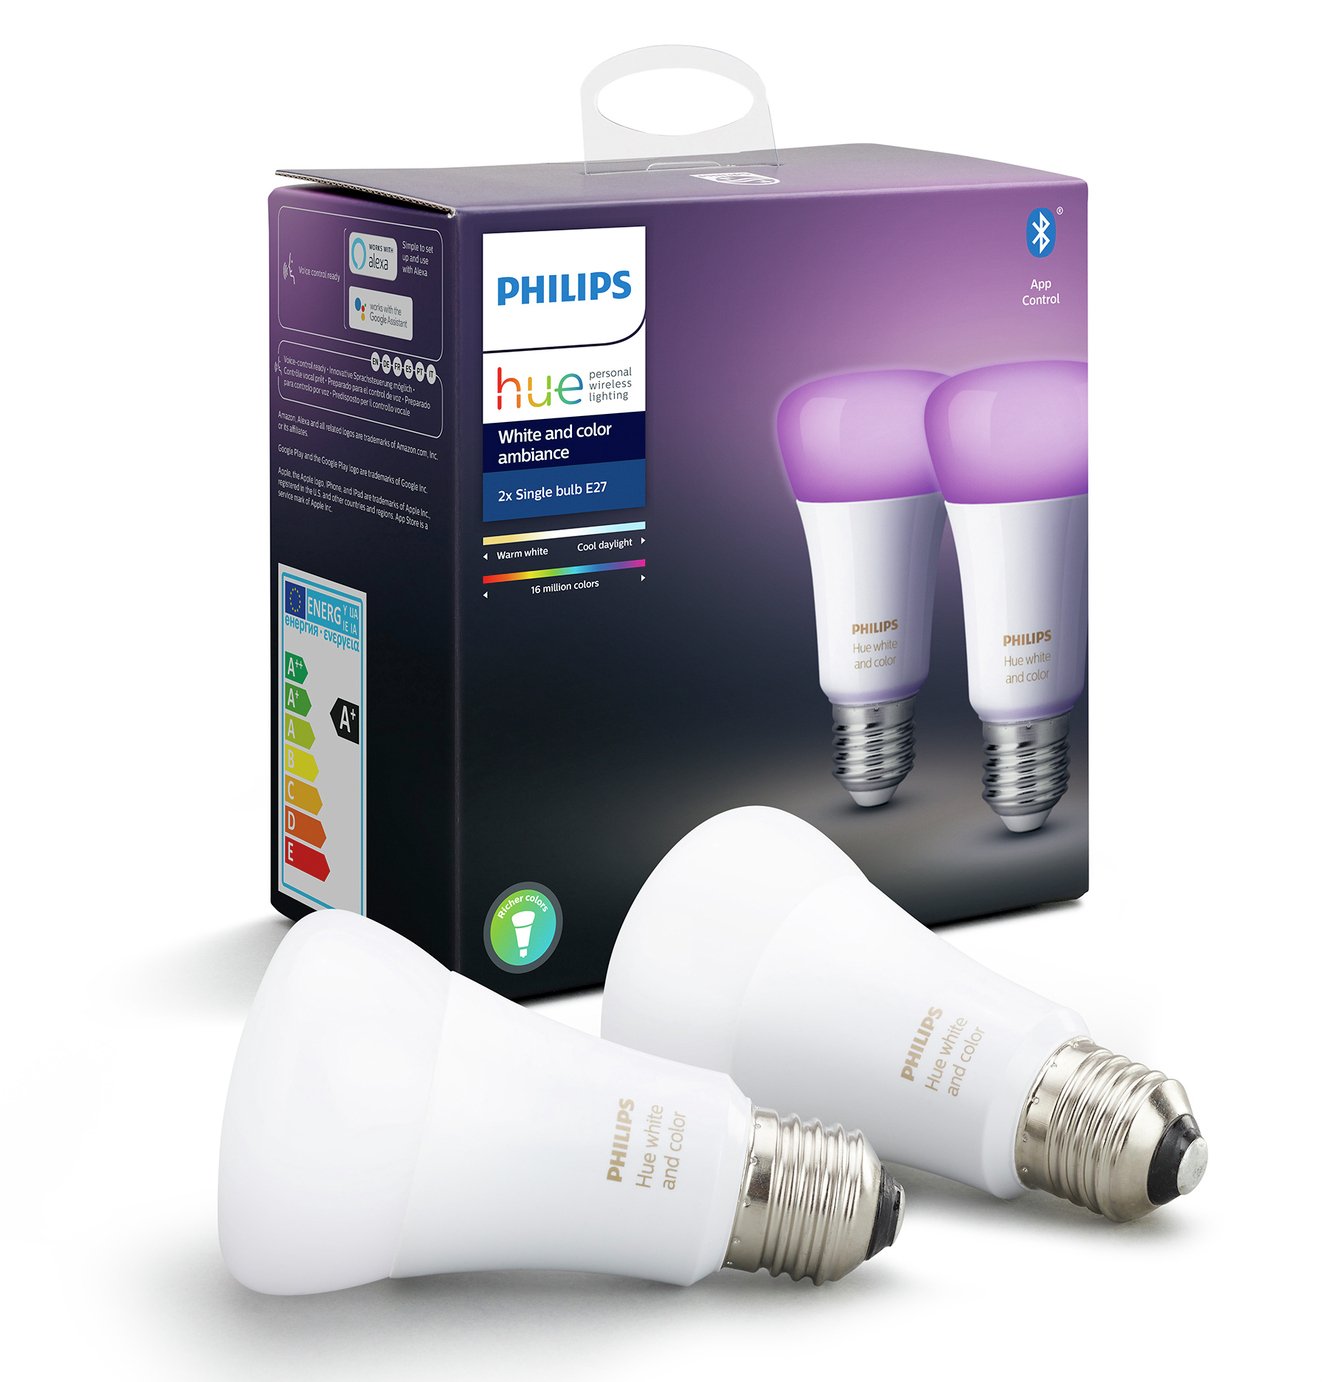 Philips Hue E27 Colour Ambiance Smart Bulbs with Bluetooth Review